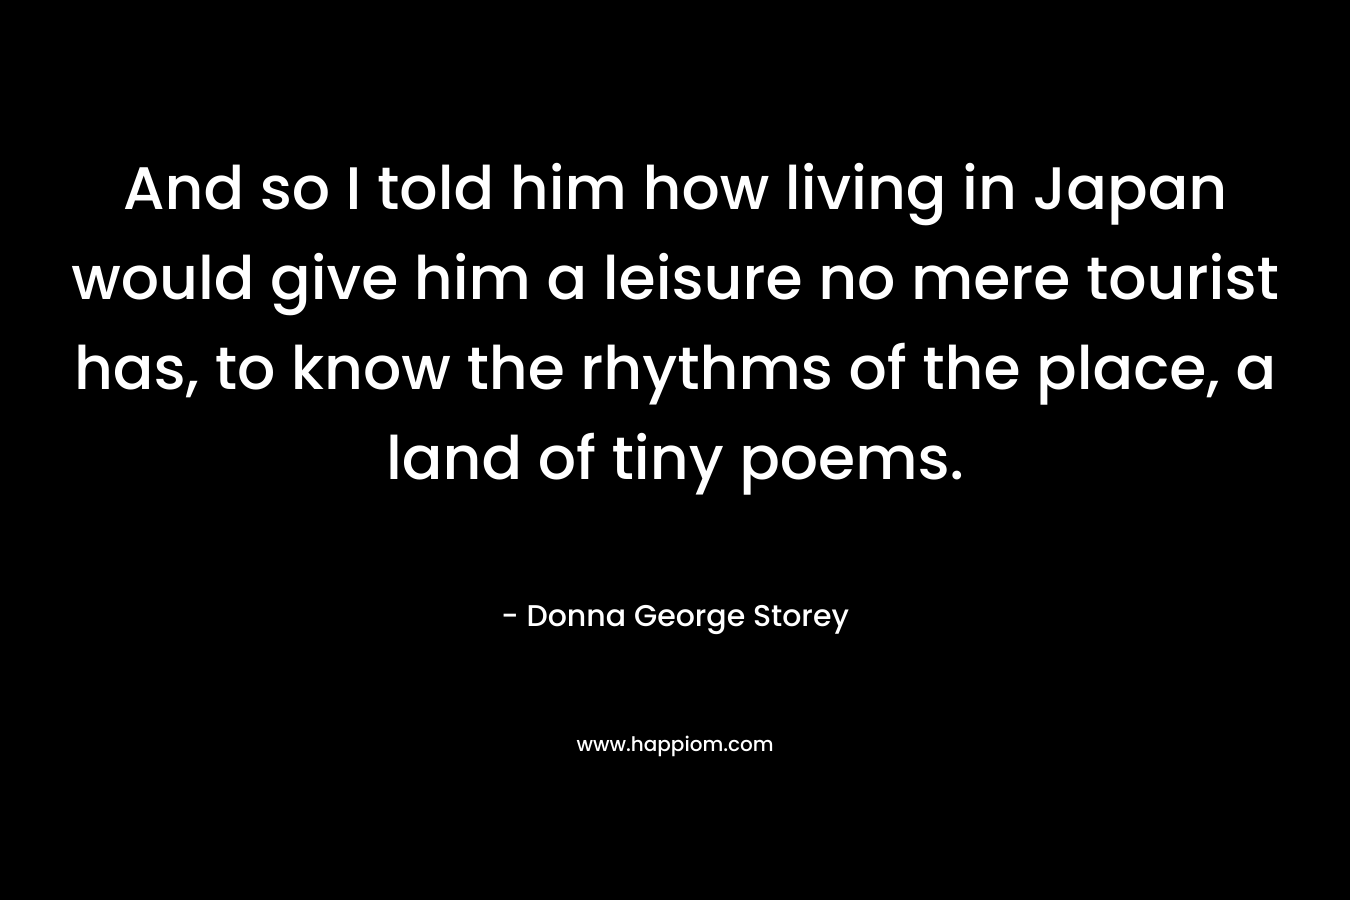 And so I told him how living in Japan would give him a leisure no mere tourist has, to know the rhythms of the place, a land of tiny poems.